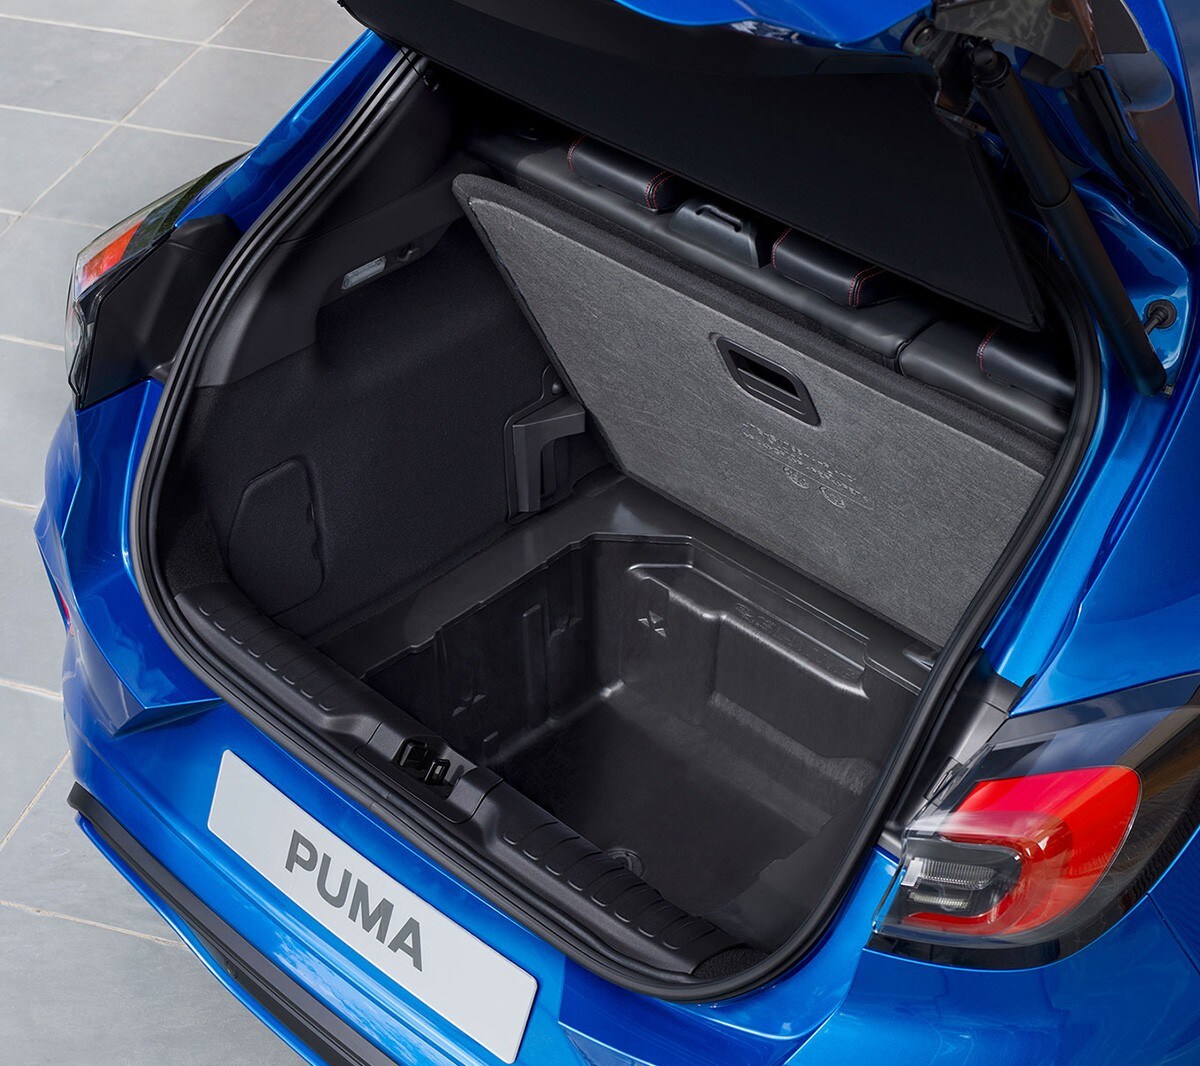 Blue Ford Puma rear view of open boot